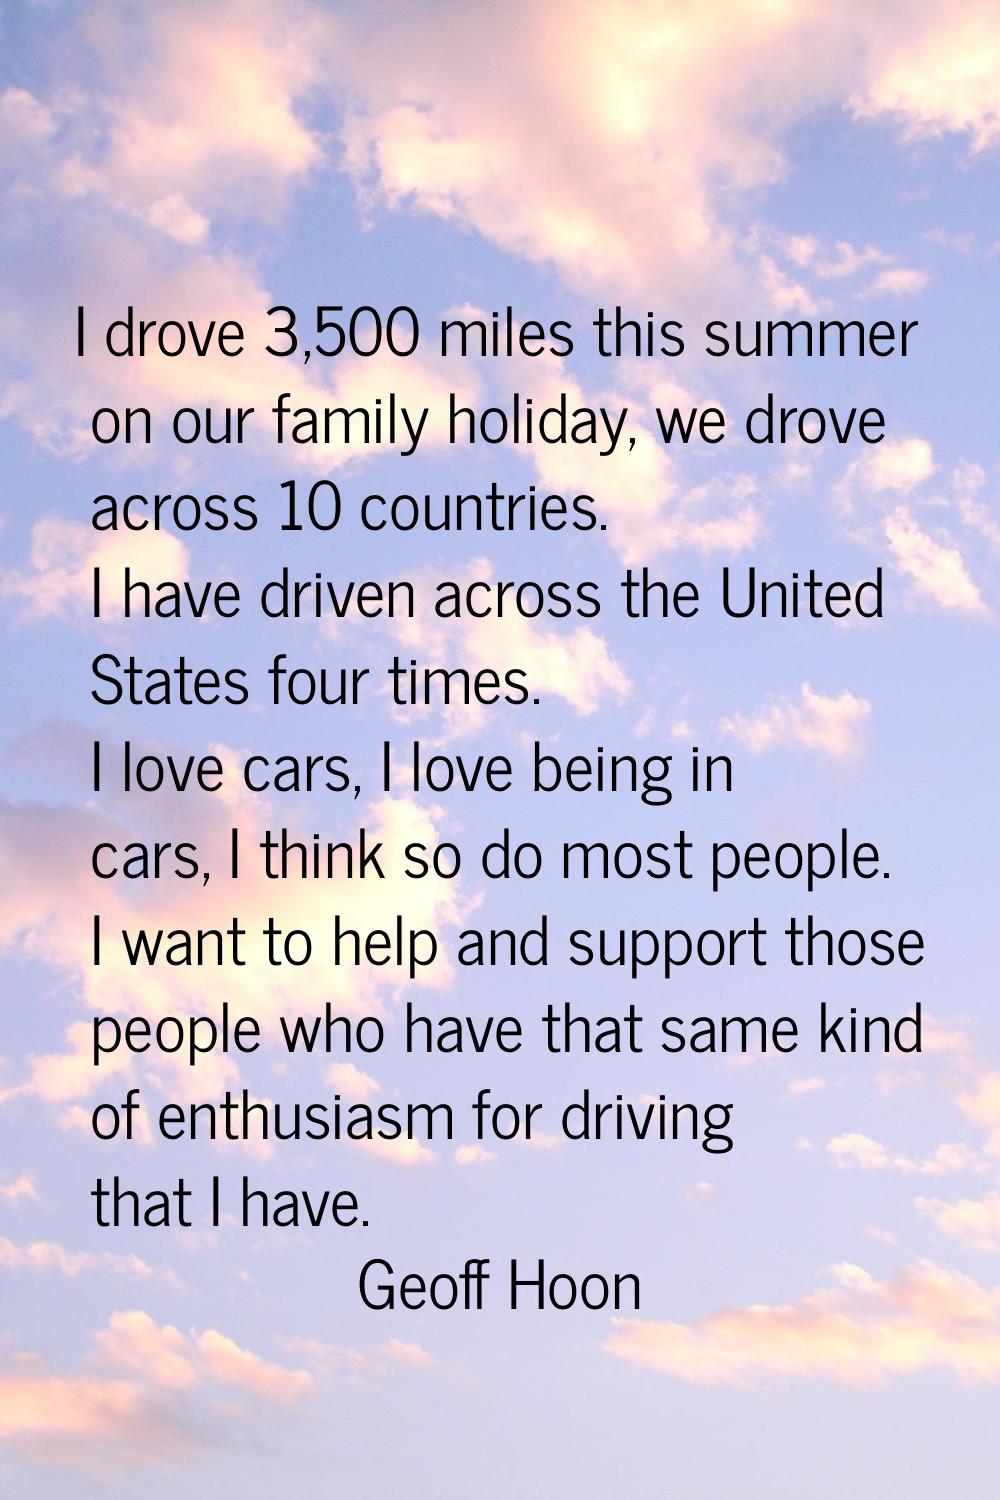 I drove 3,500 miles this summer on our family holiday, we drove across 10 countries. I have driven 